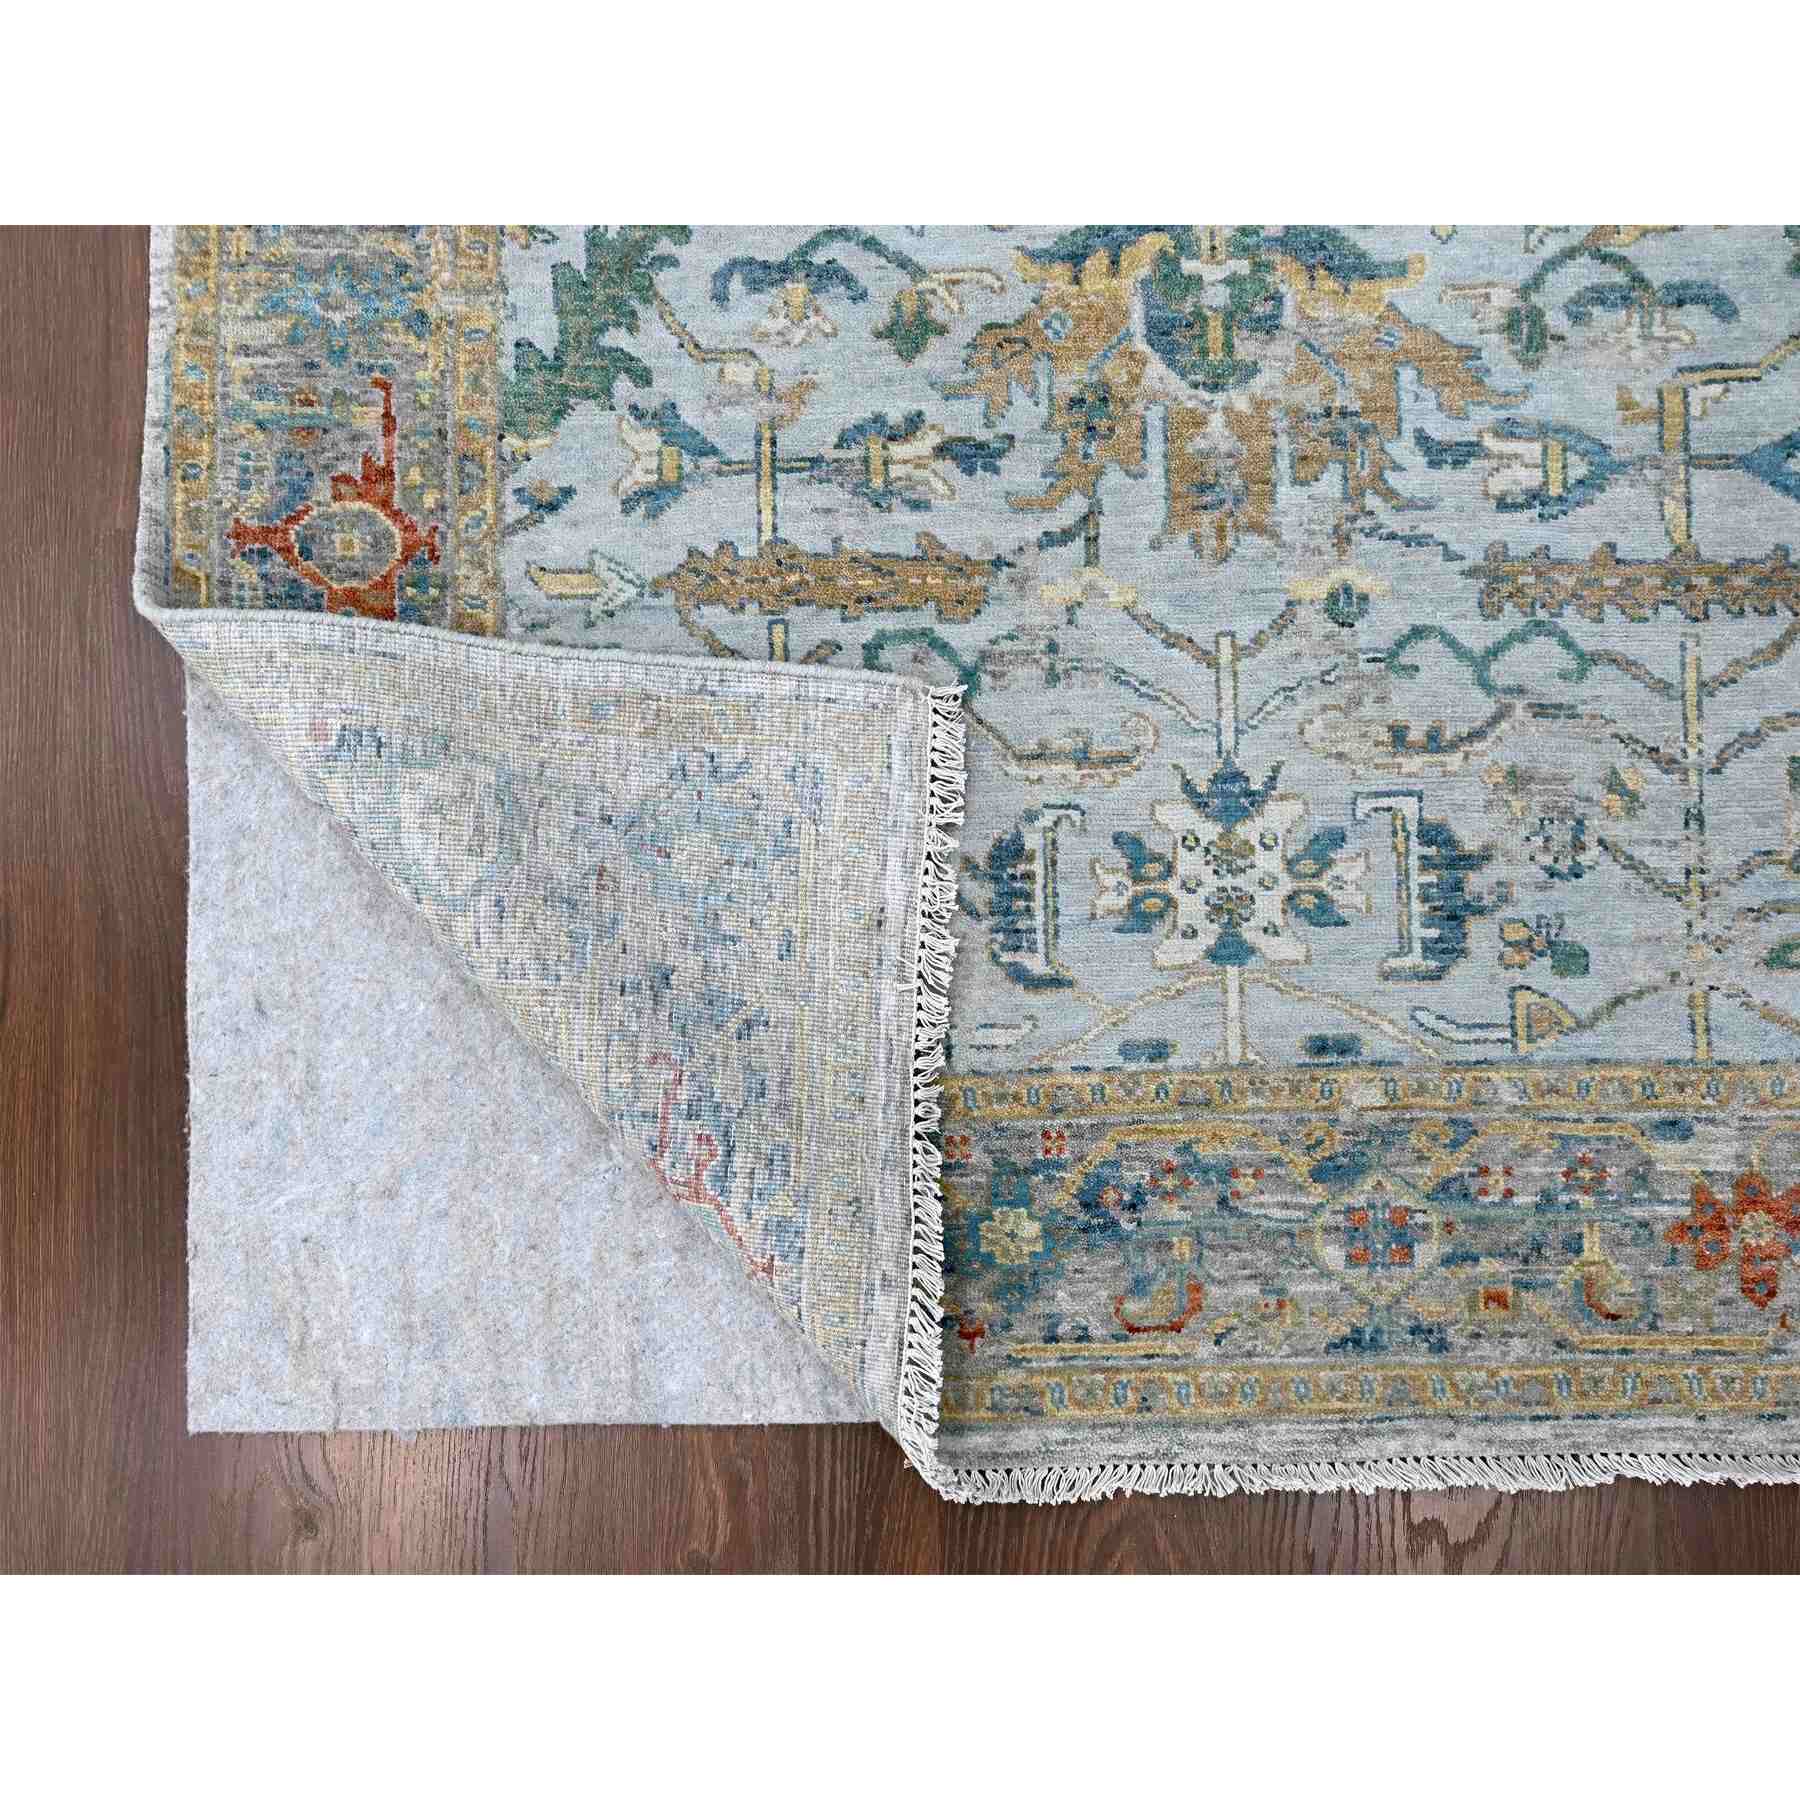 Transitional-Hand-Knotted-Rug-424760